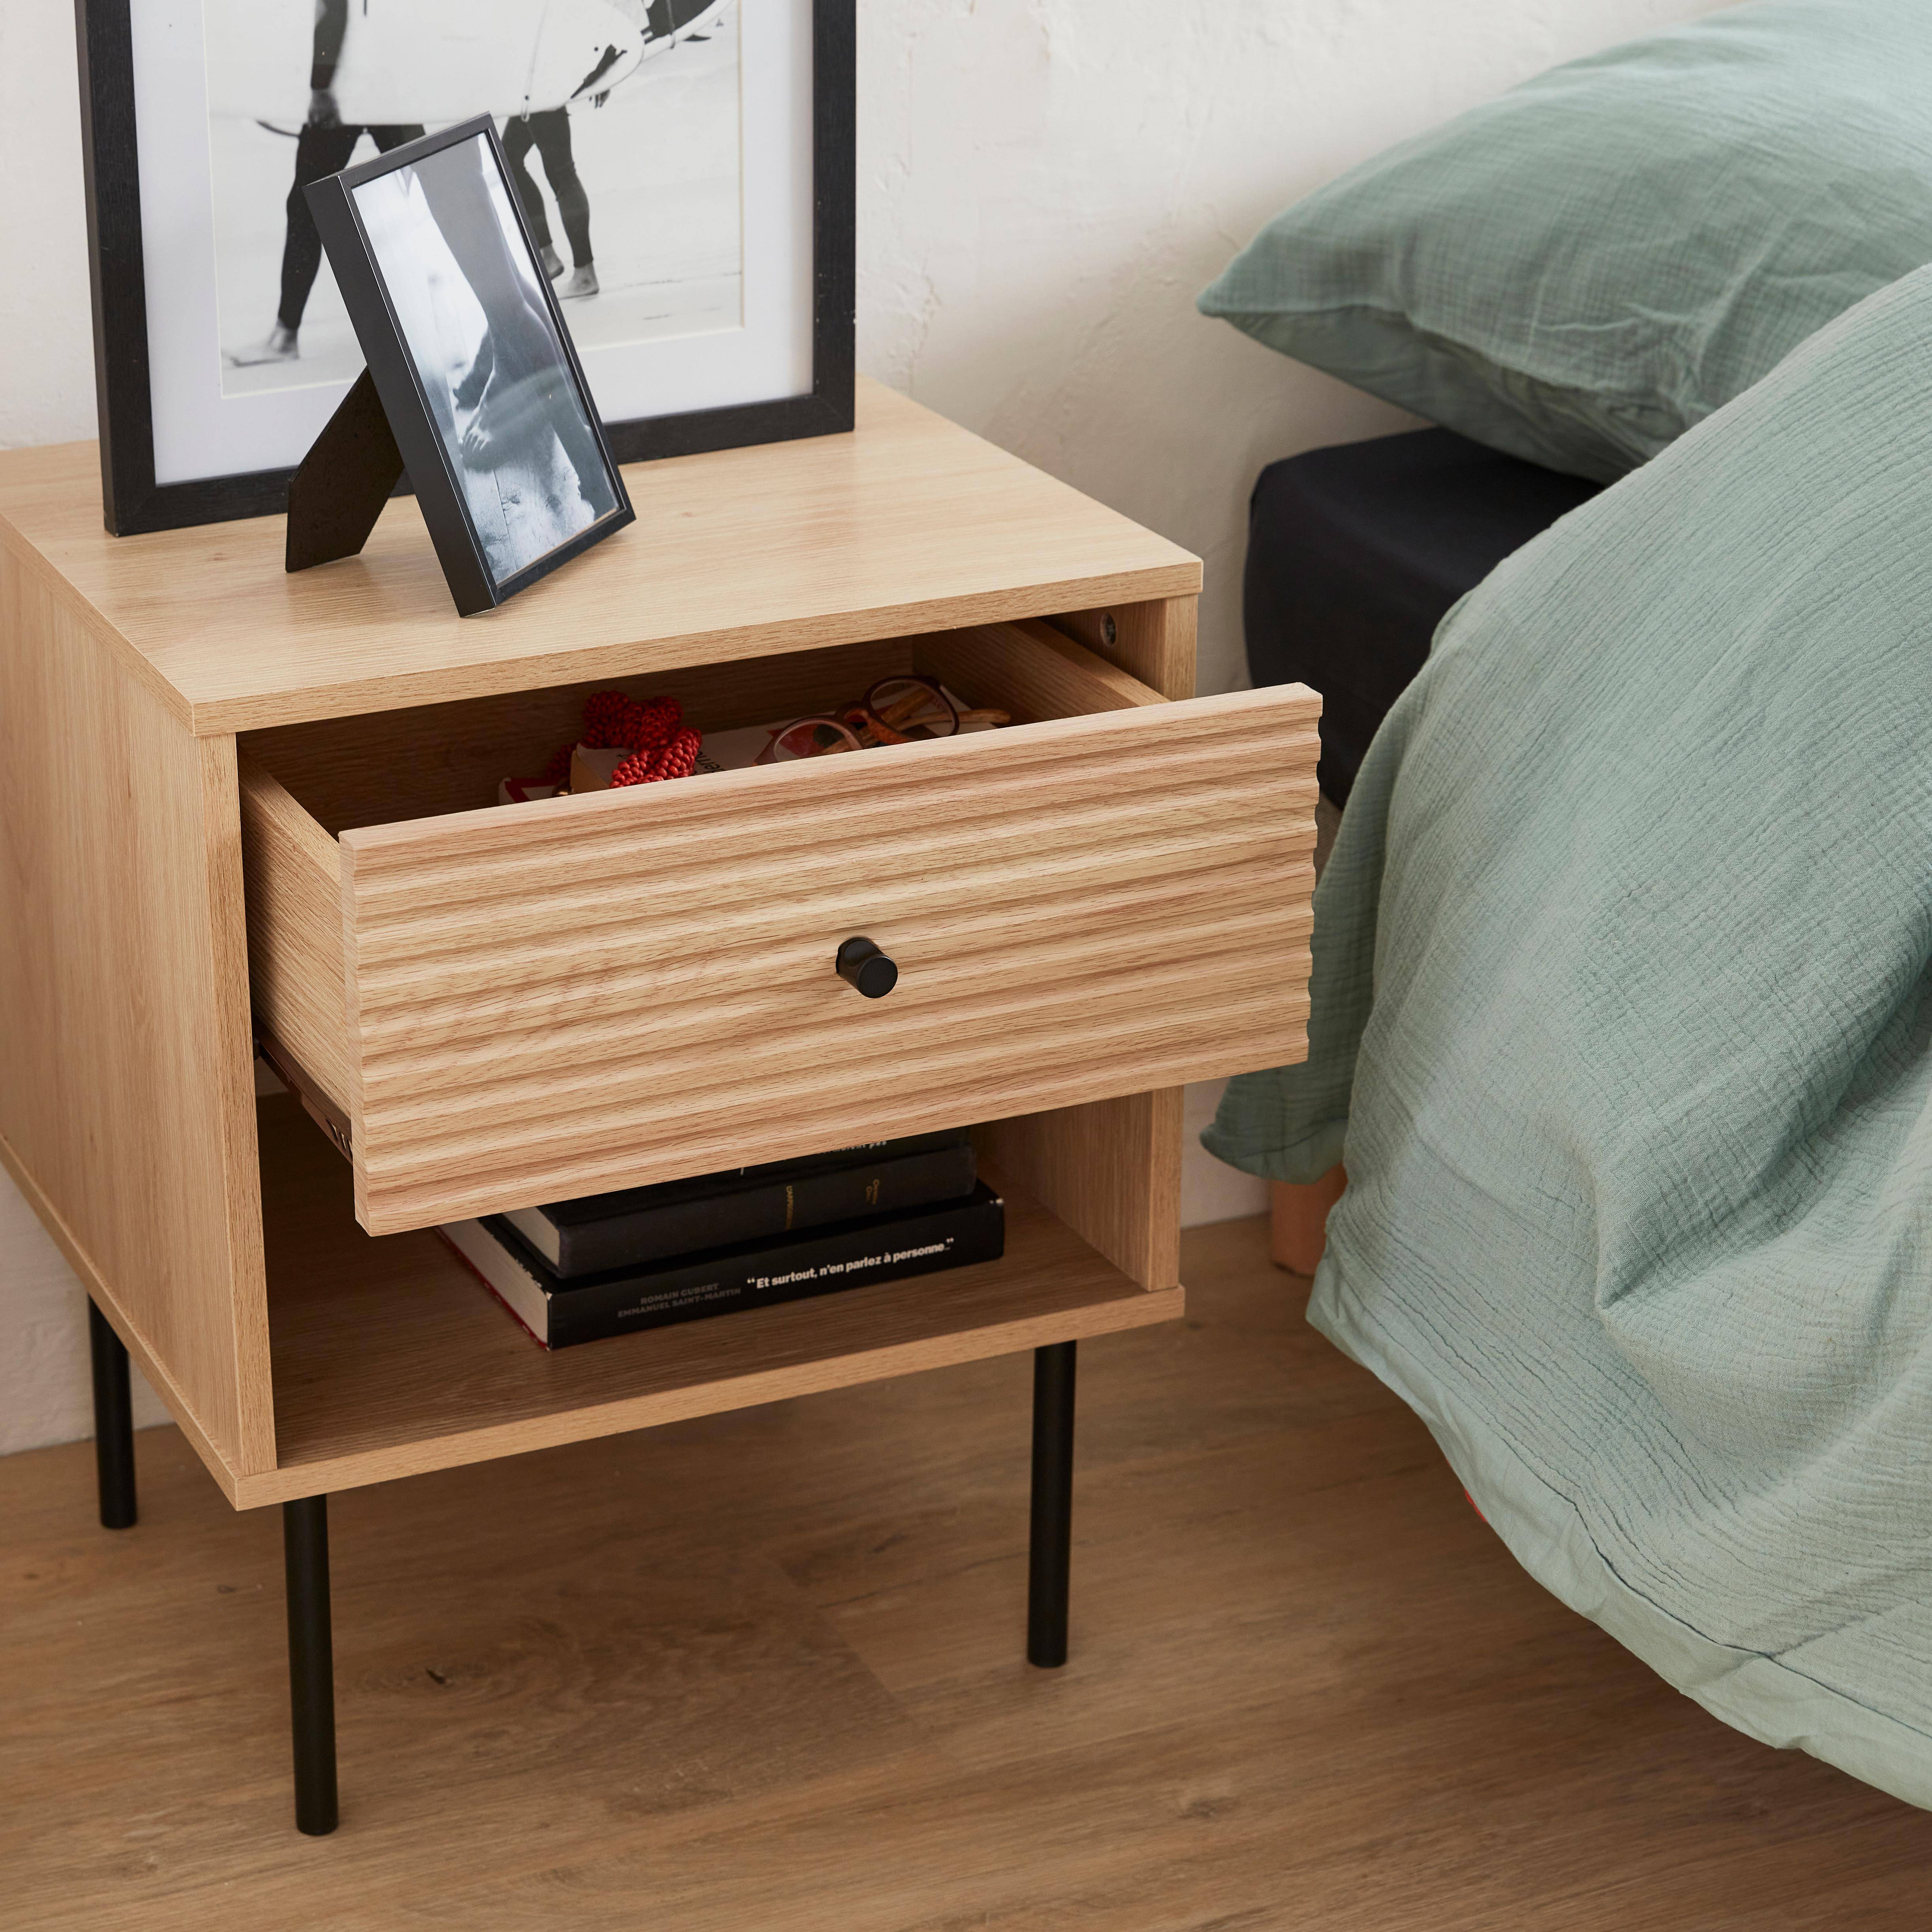 Grooved wood-effect bedside table, 45x39.5x55cm - Braga - Natural wood colour,sweeek,Photo2